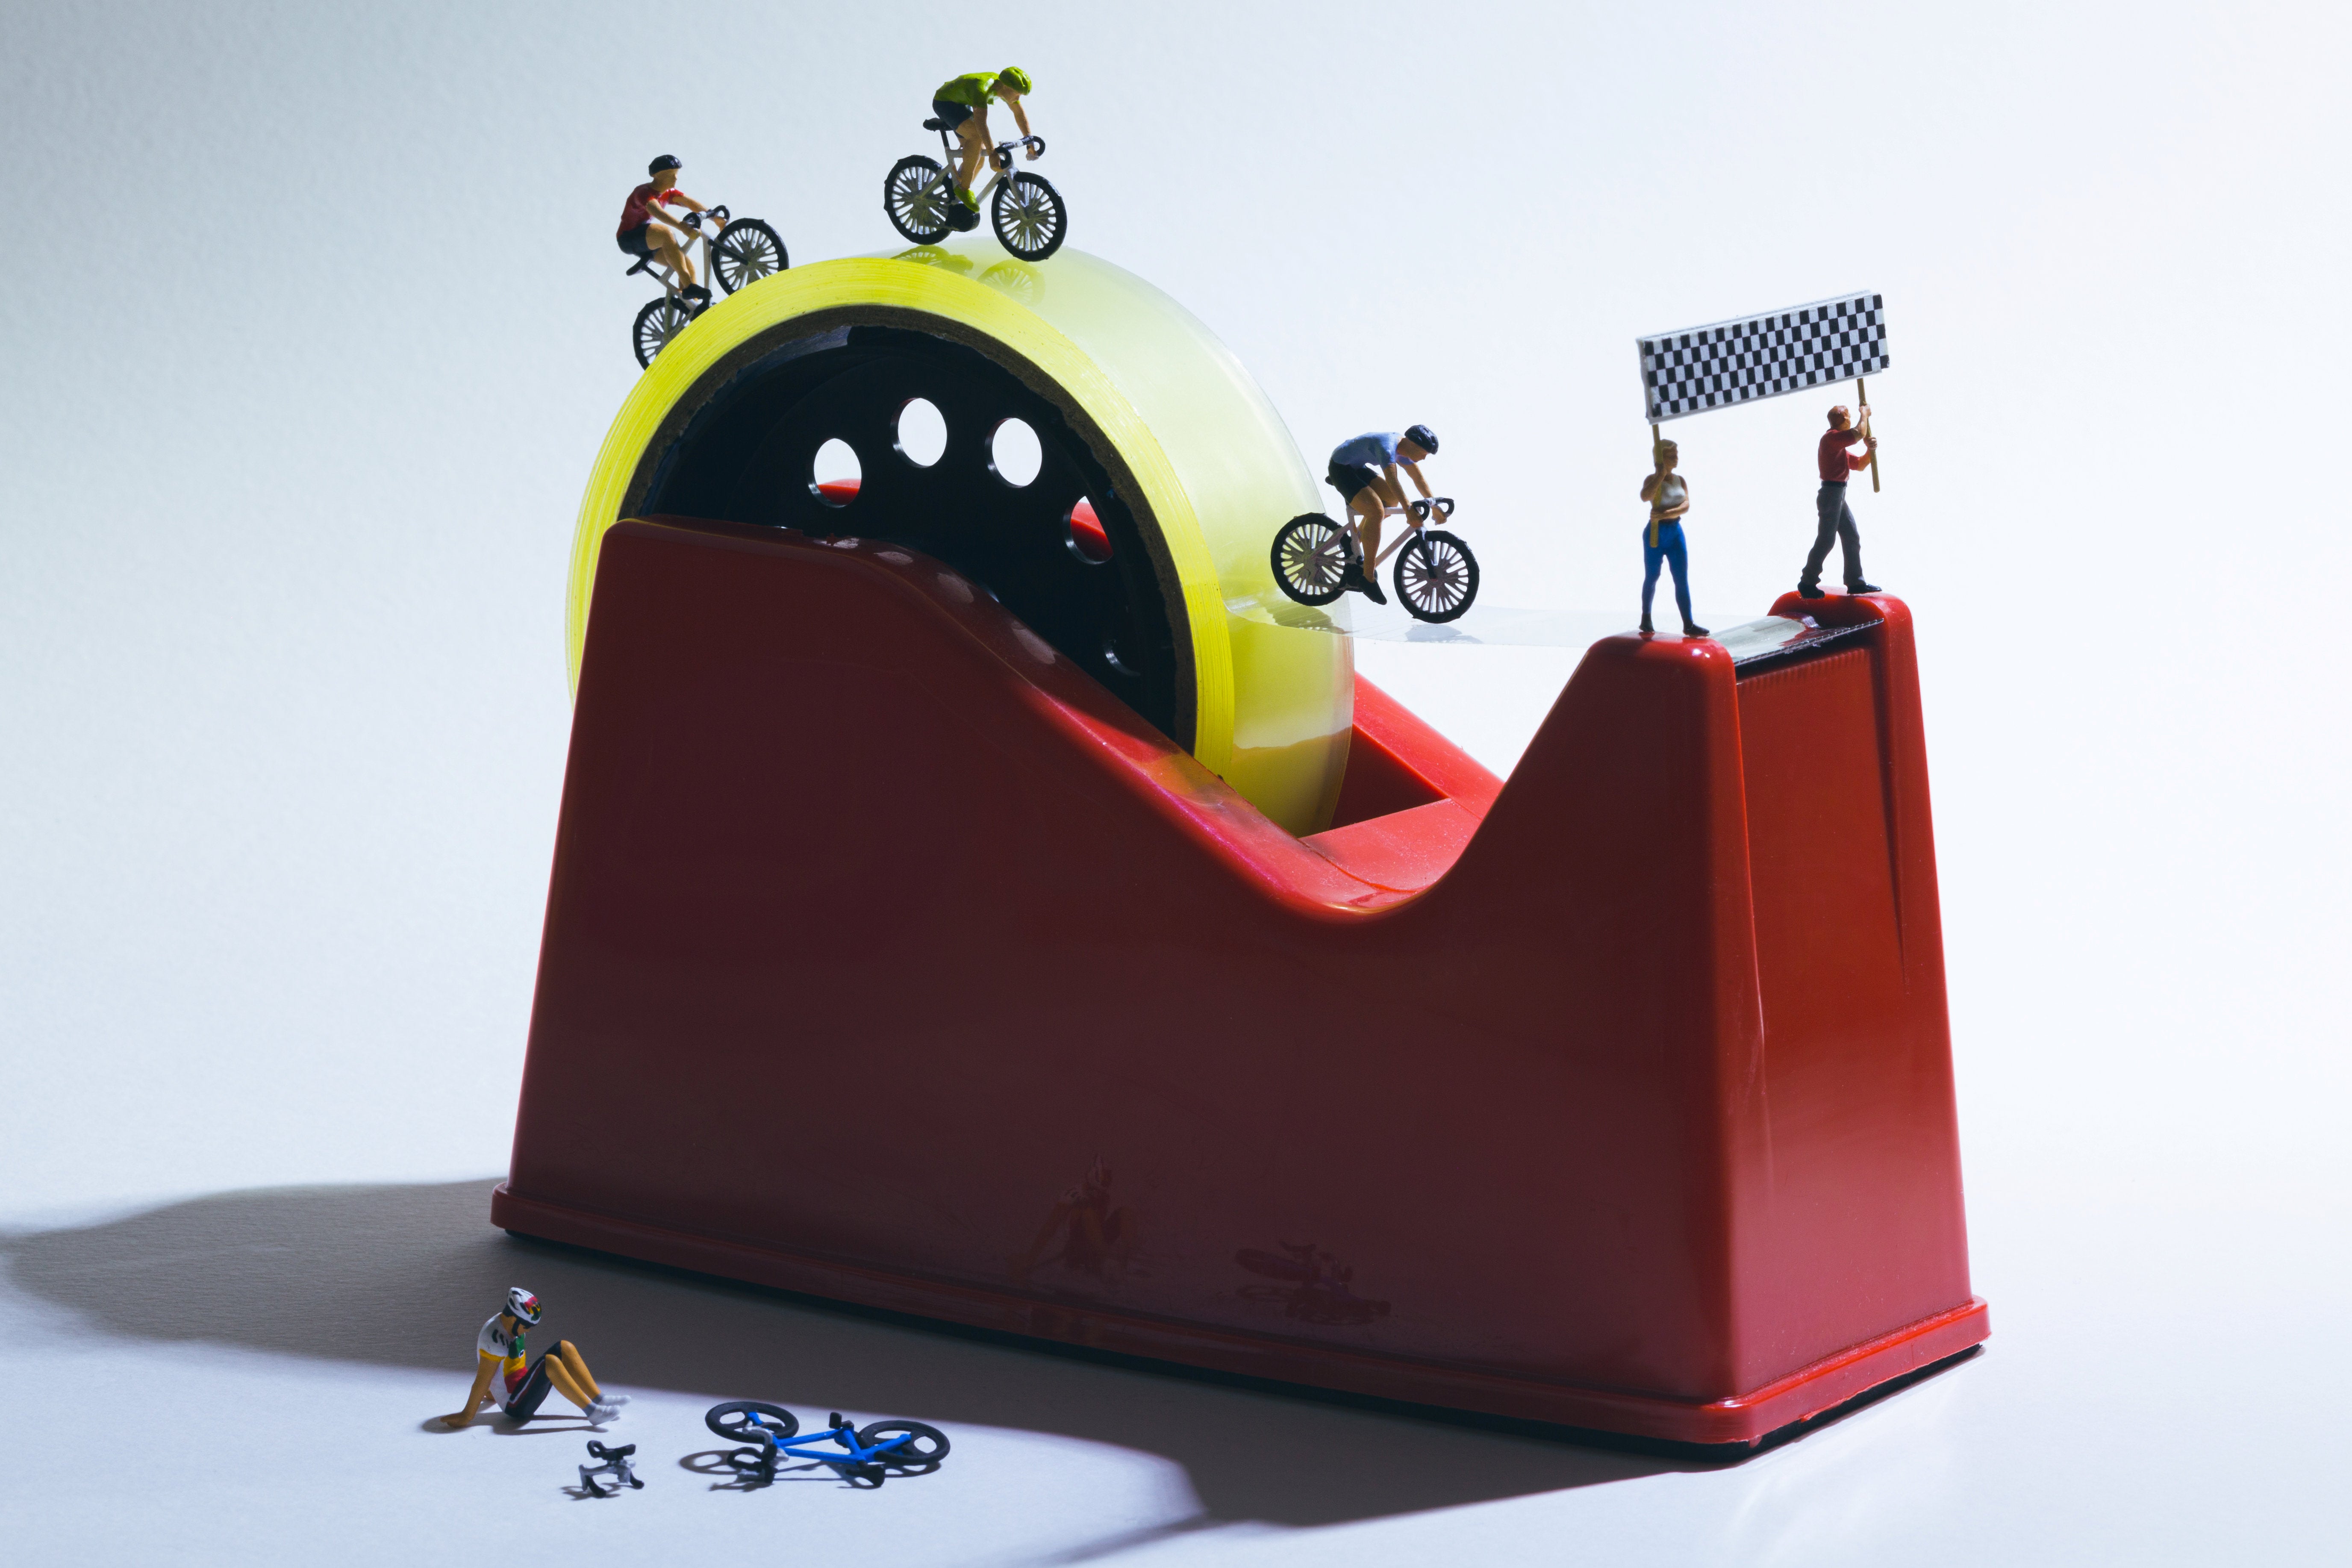 A cycle race over a tape dispenser